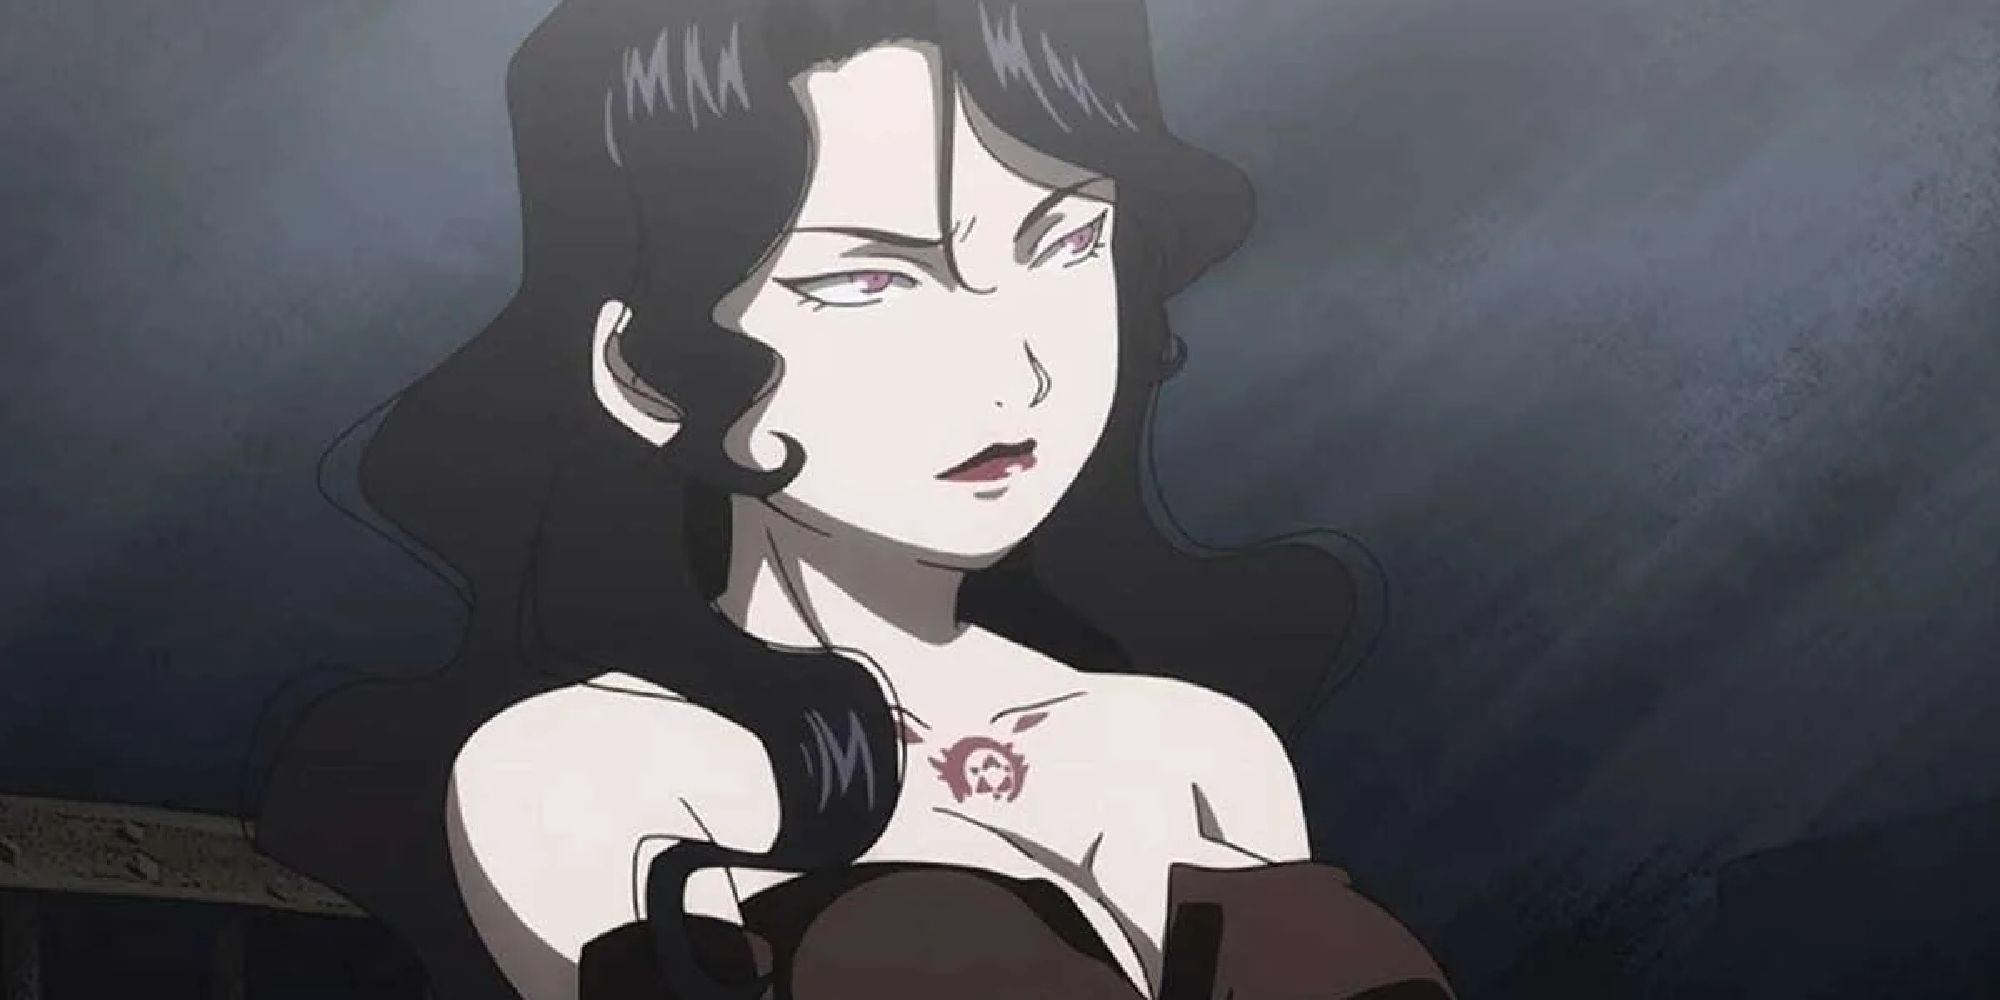 Lust wears a partial scowl on her face as she looks off to the side, standing in a dark room. 